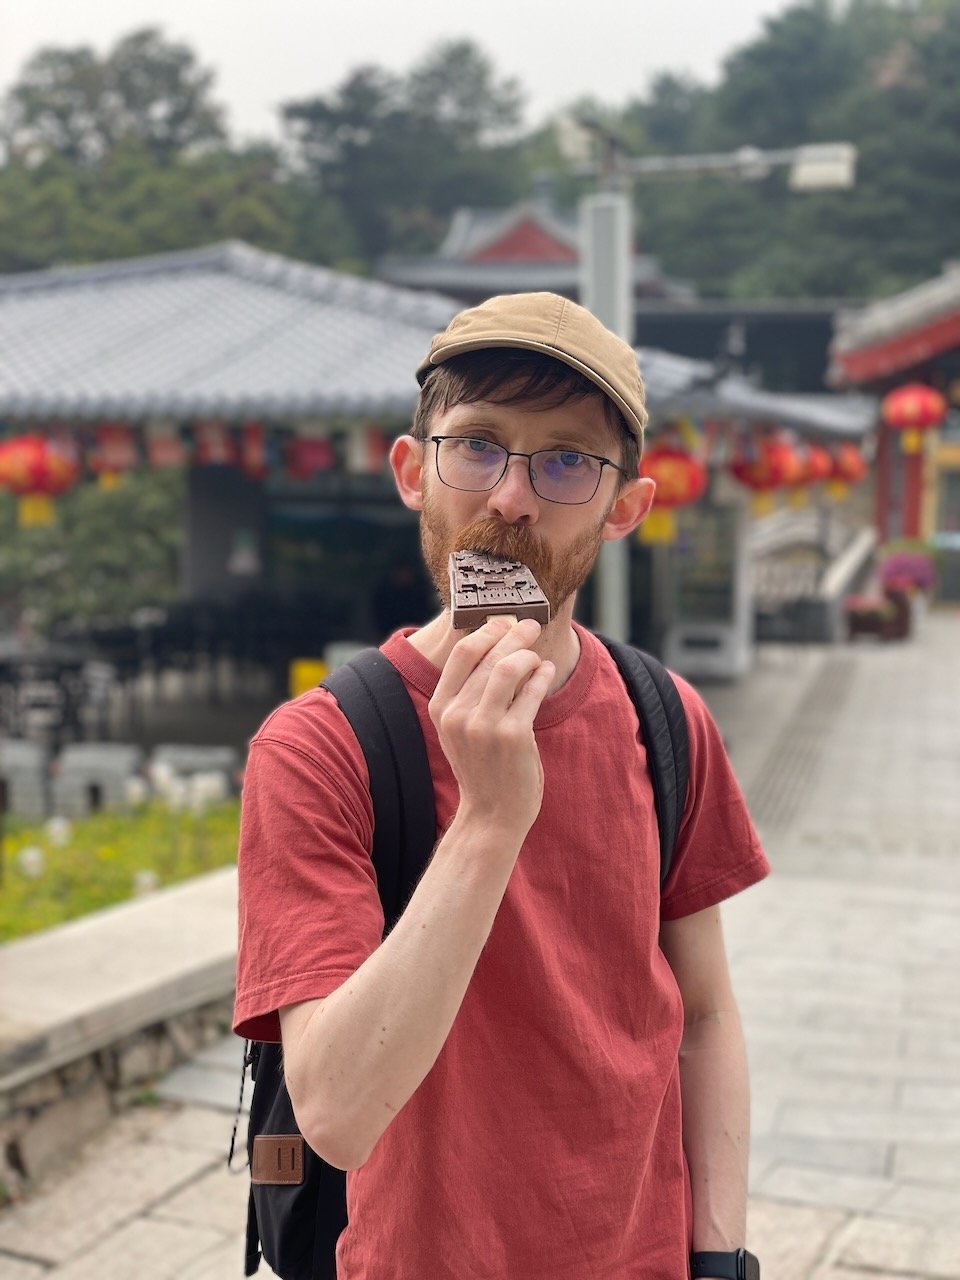 Me, eating an ice-pop shaped like the Great Wall of China